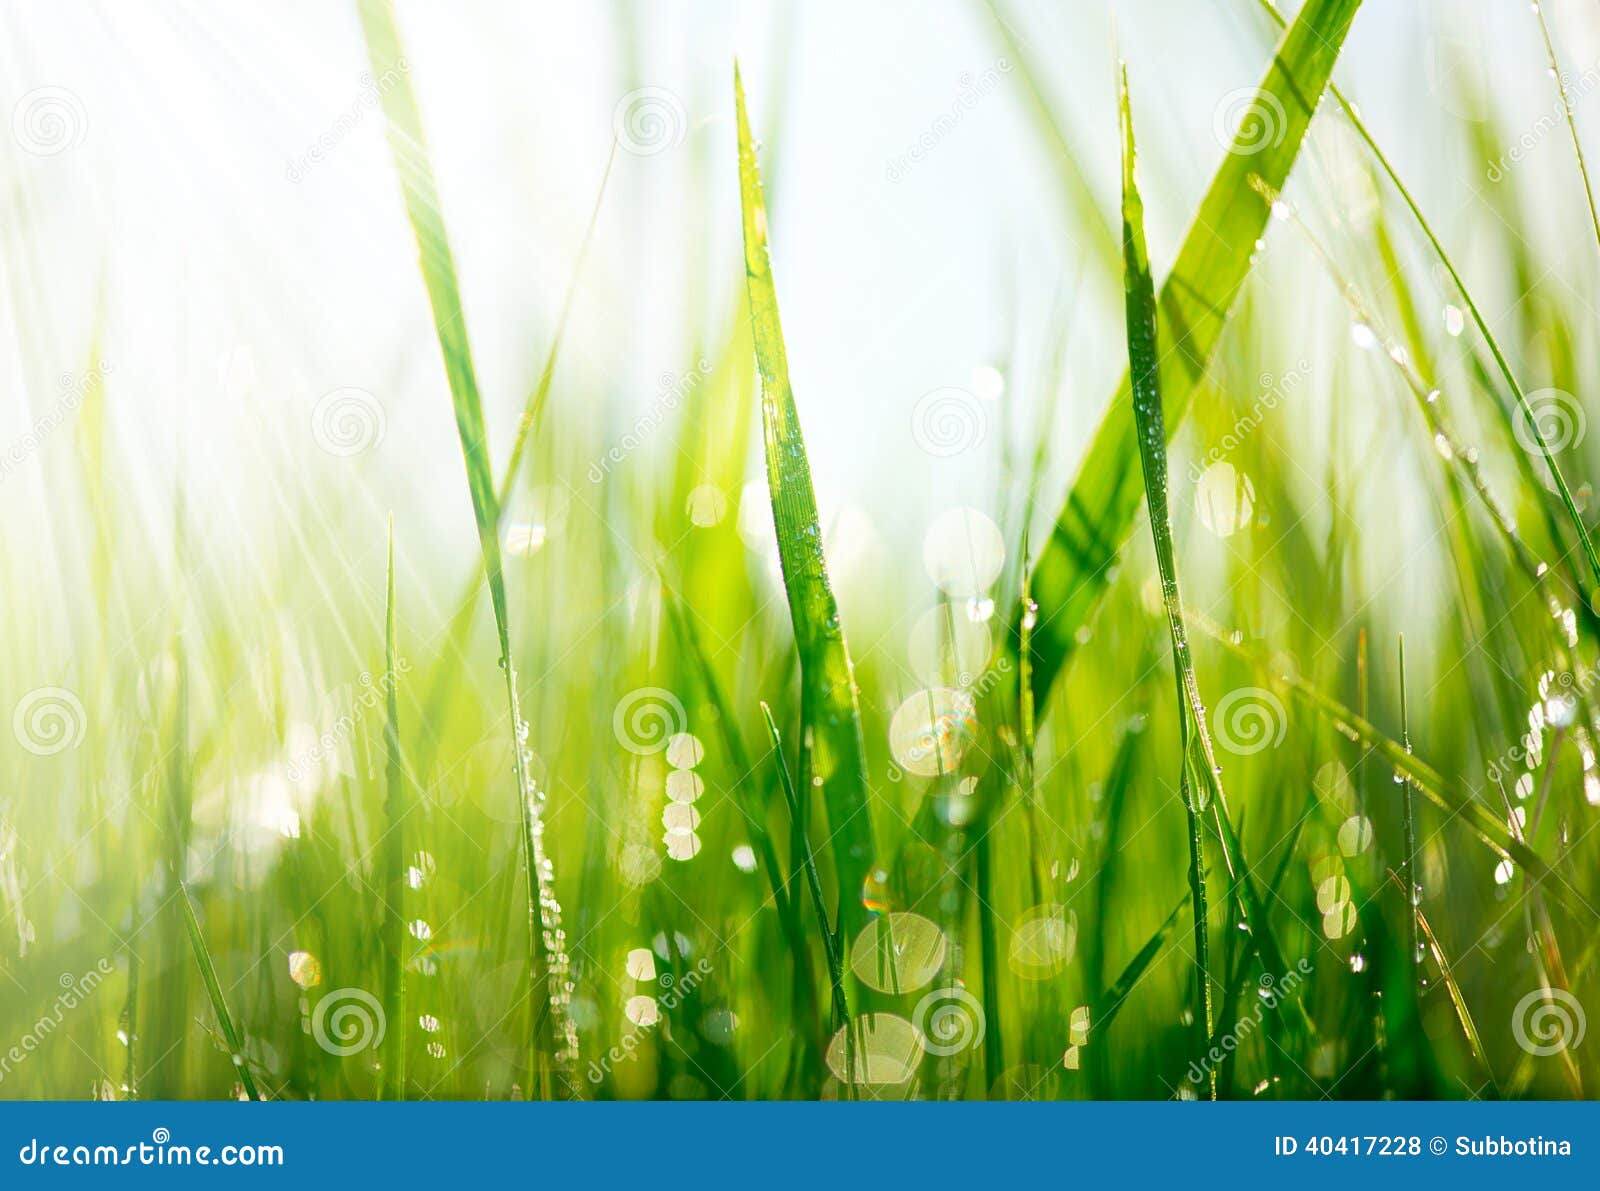 Green grass with dew drops stock photo. Image of freshness - 40417228